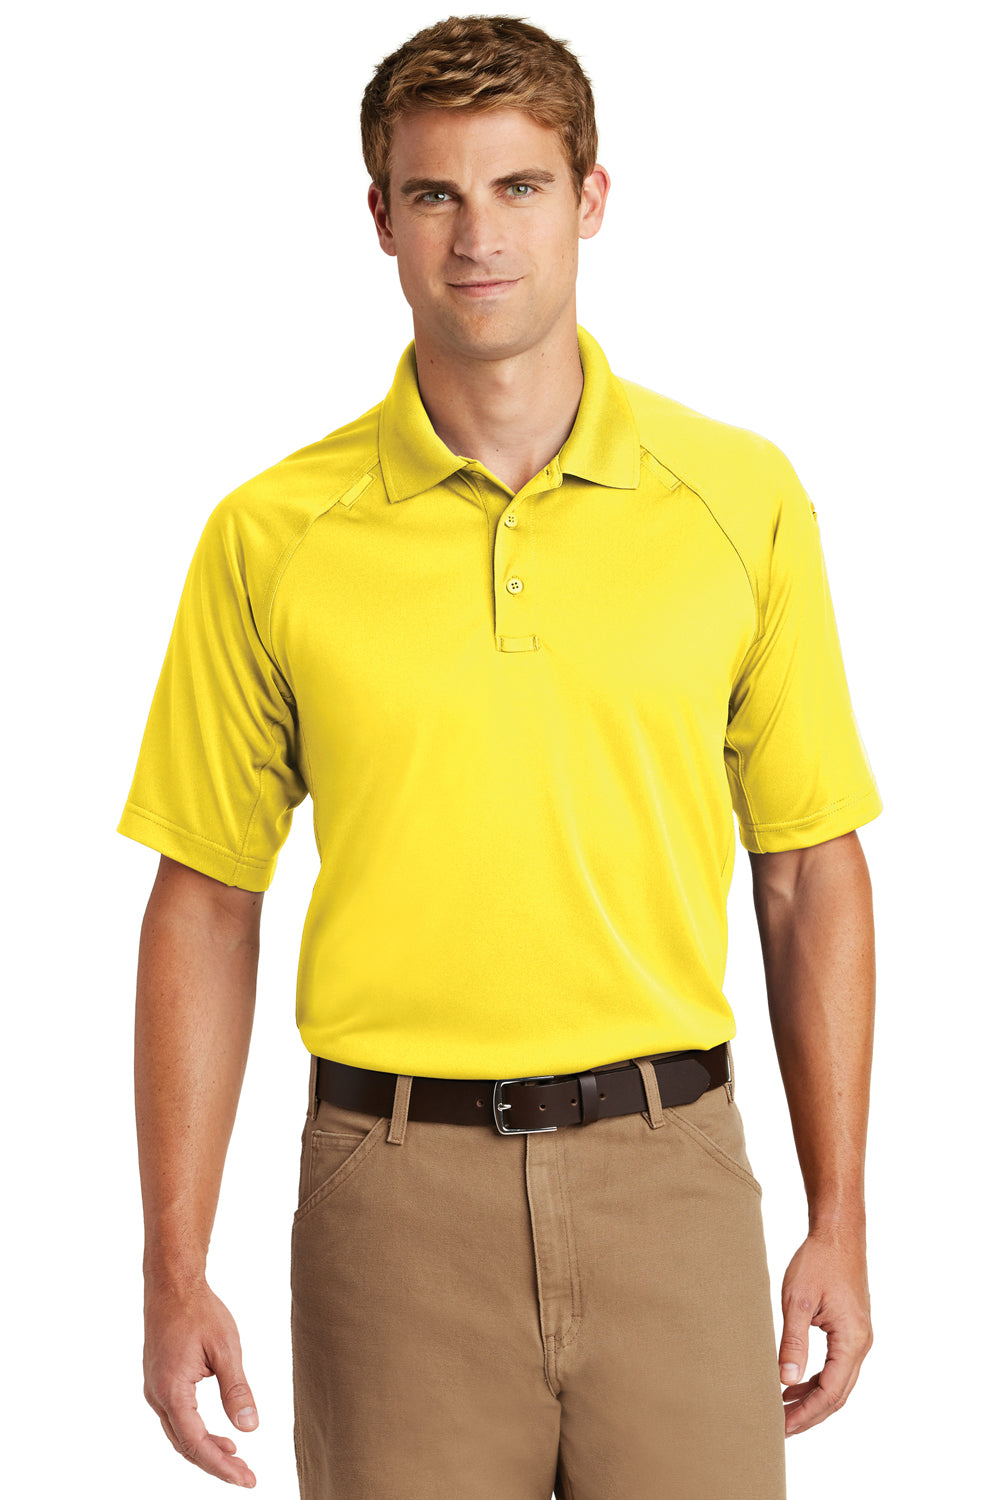 CornerStone CS410 Mens Select Tactical Moisture Wicking Short Sleeve Polo Shirt Yellow Front